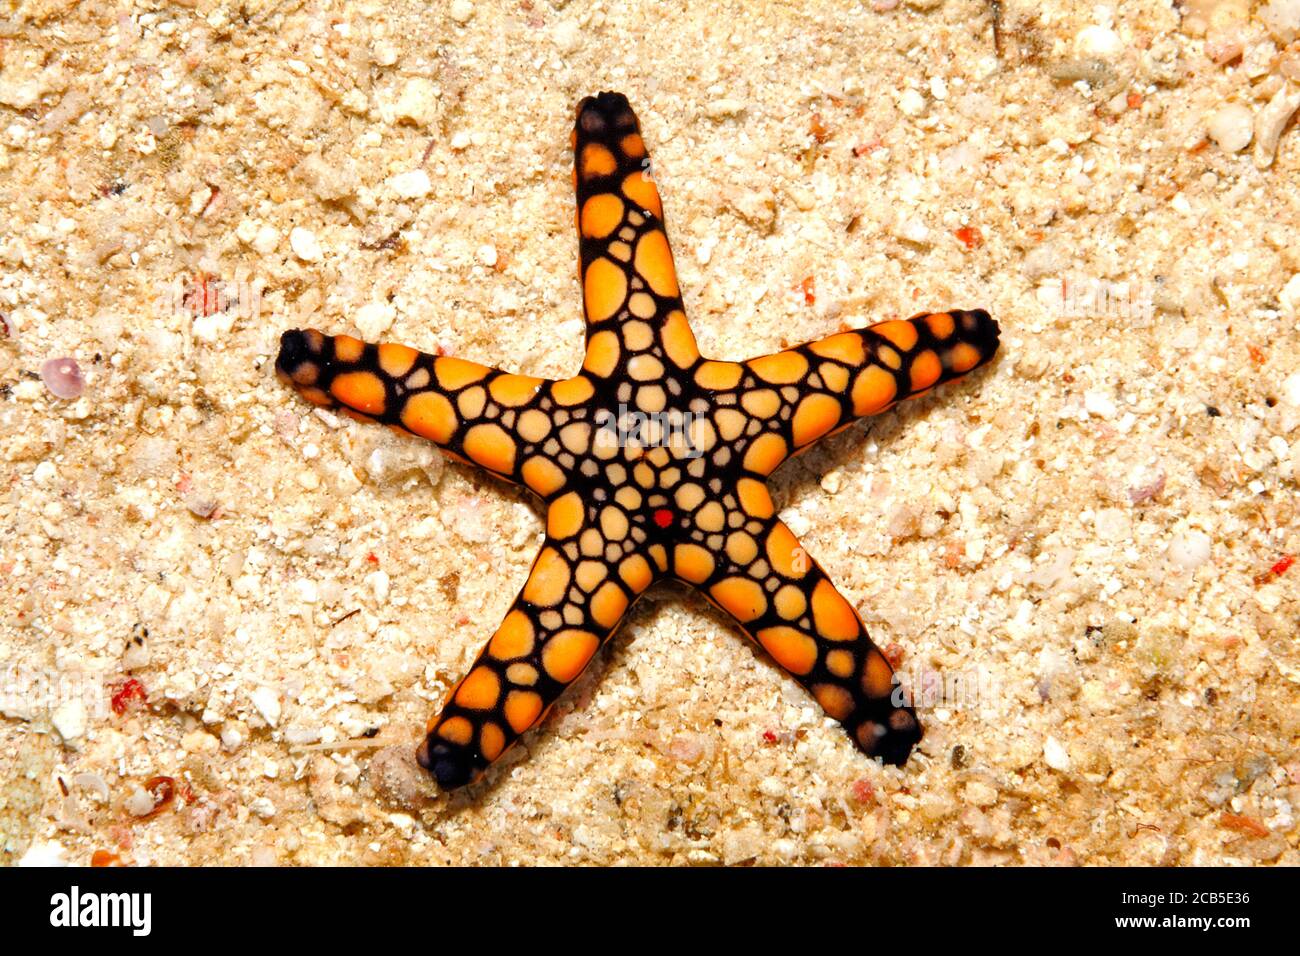 Starfish or Sea Star, Fromia sp. Appears to be an undescribed species. Uepi, Solomon Islands. Solomon Sea, Pacific Ocean Stock Photo